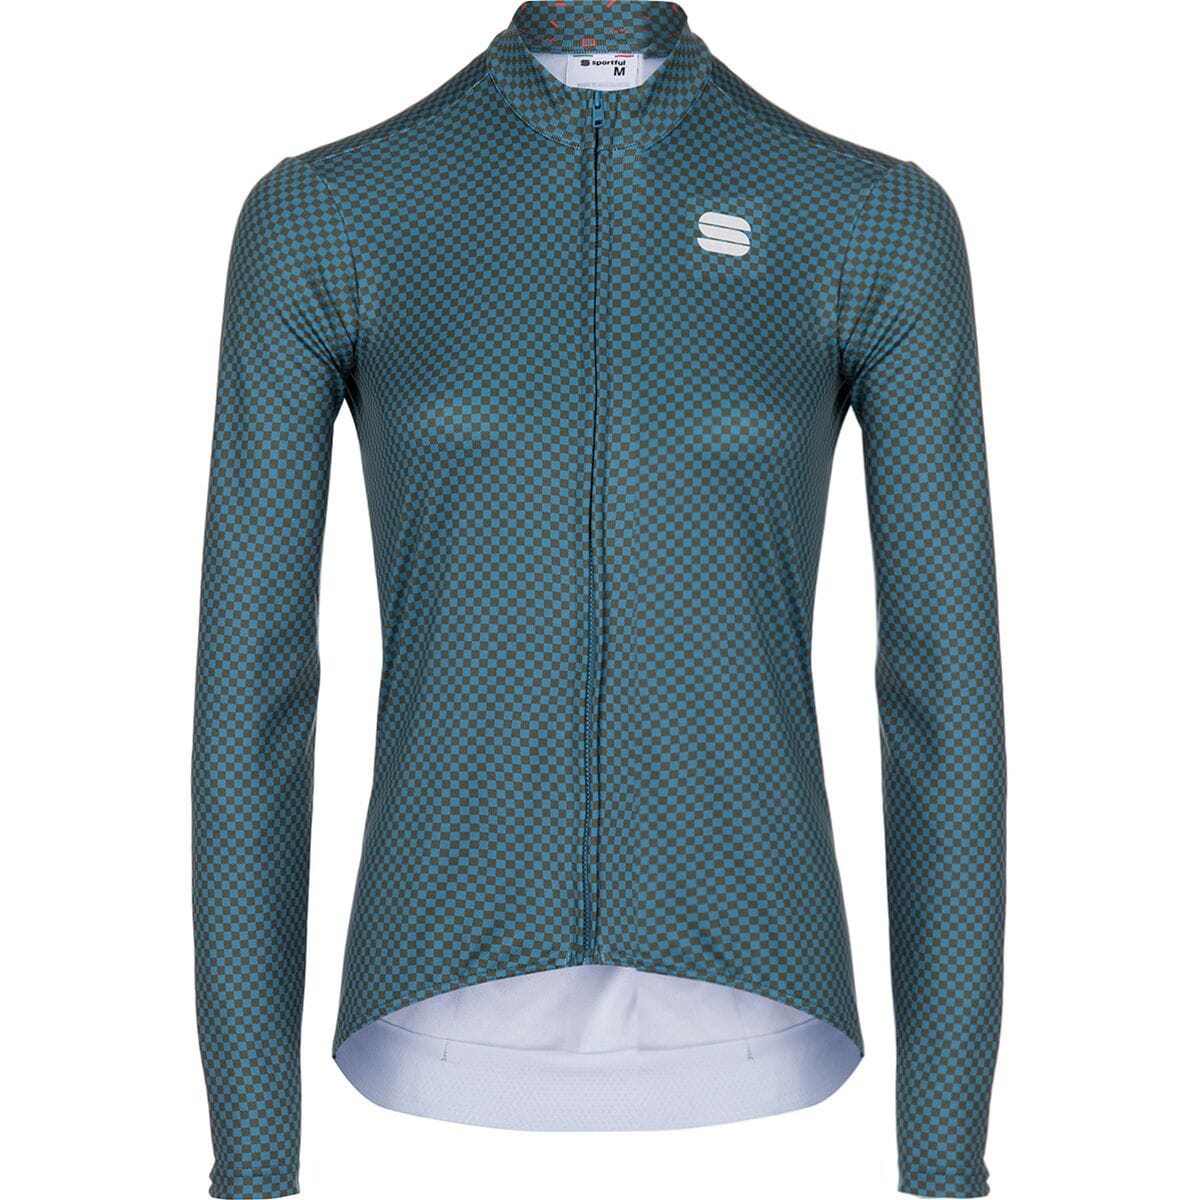 Sportful Checkmate Thermal Jersey - Women's